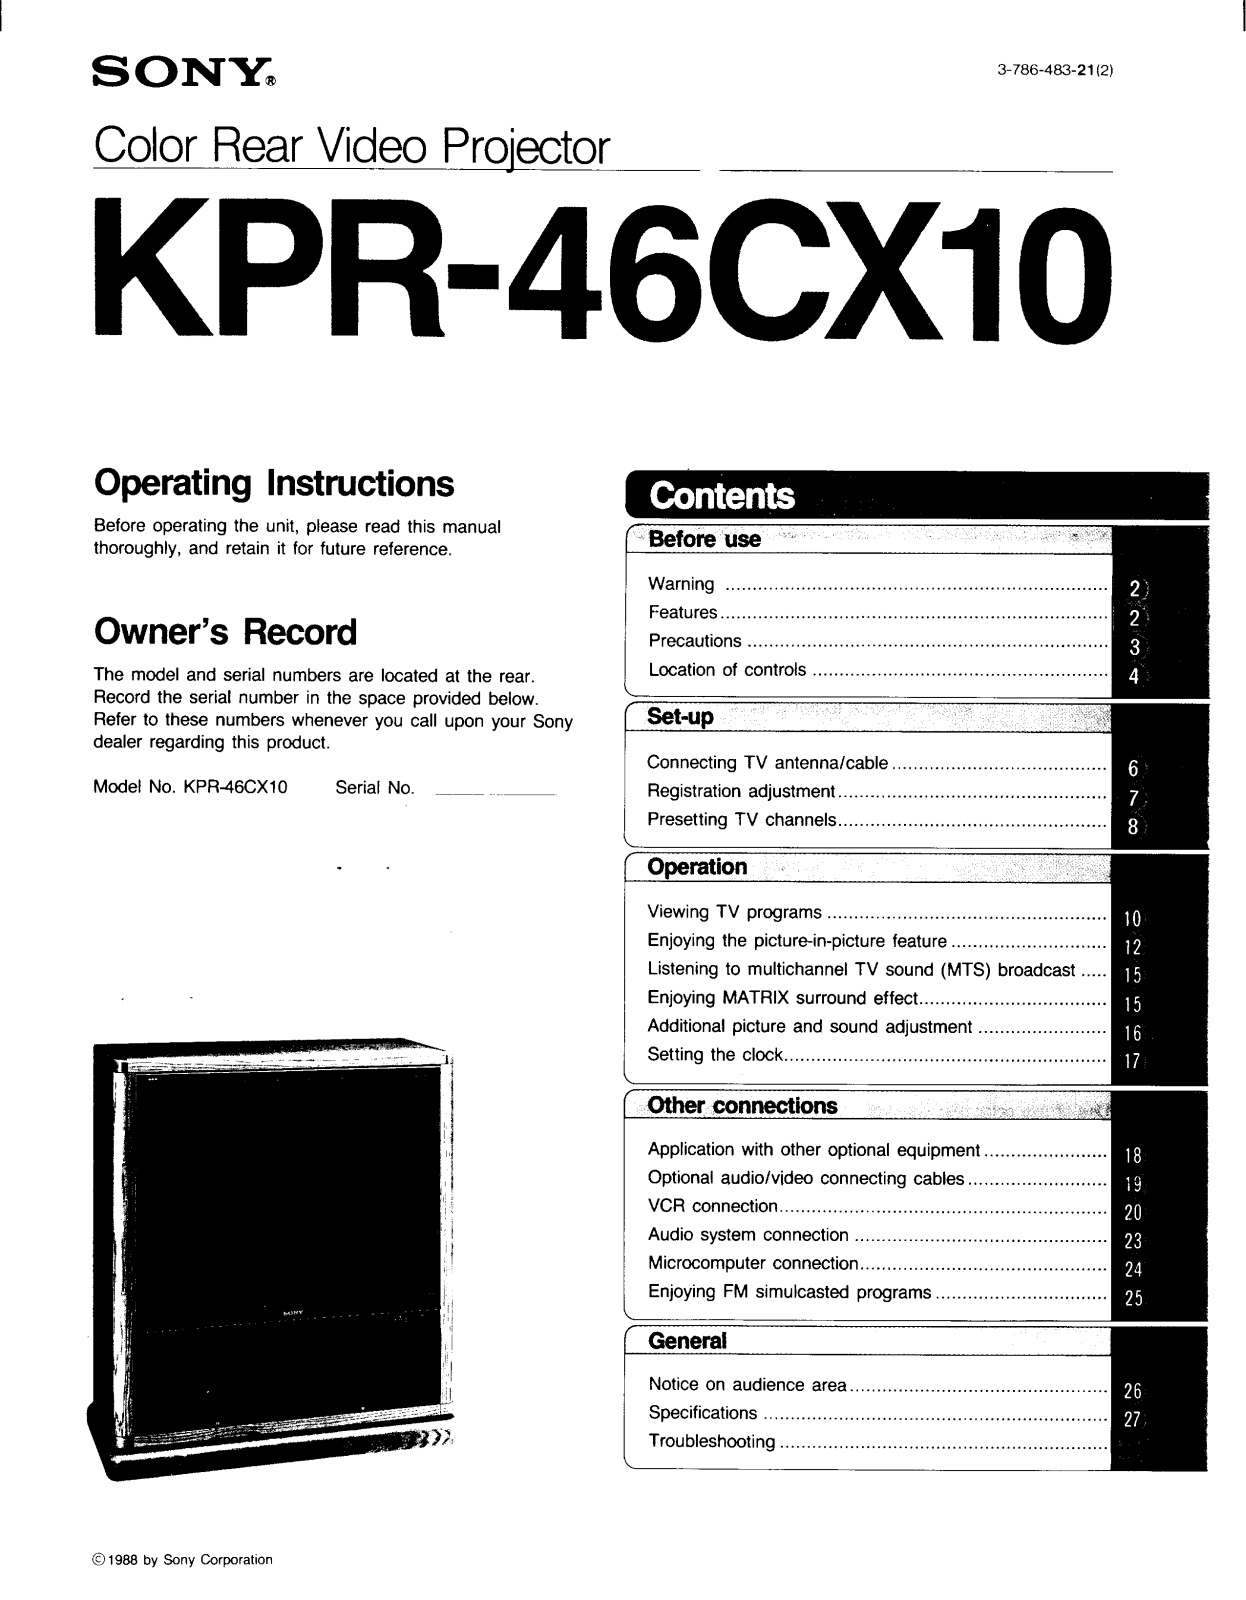 Sony KP-R46CX10 Primary User Manual